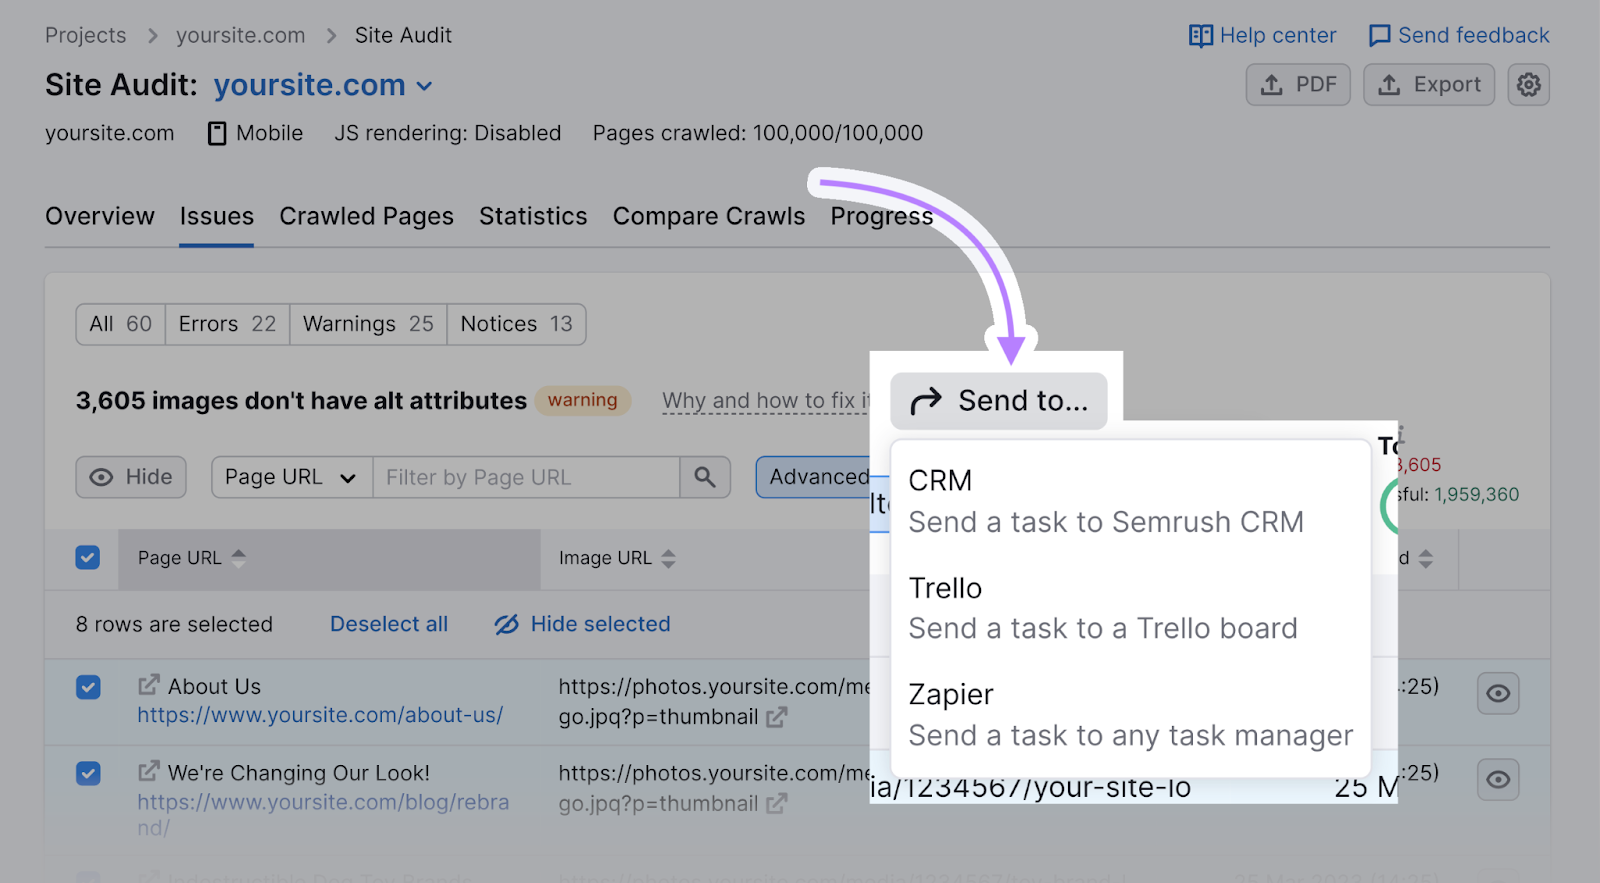 The "Send to..." button in Semrush's Site Audit tool. The options are "CRM," "Trello," and "Zapier."